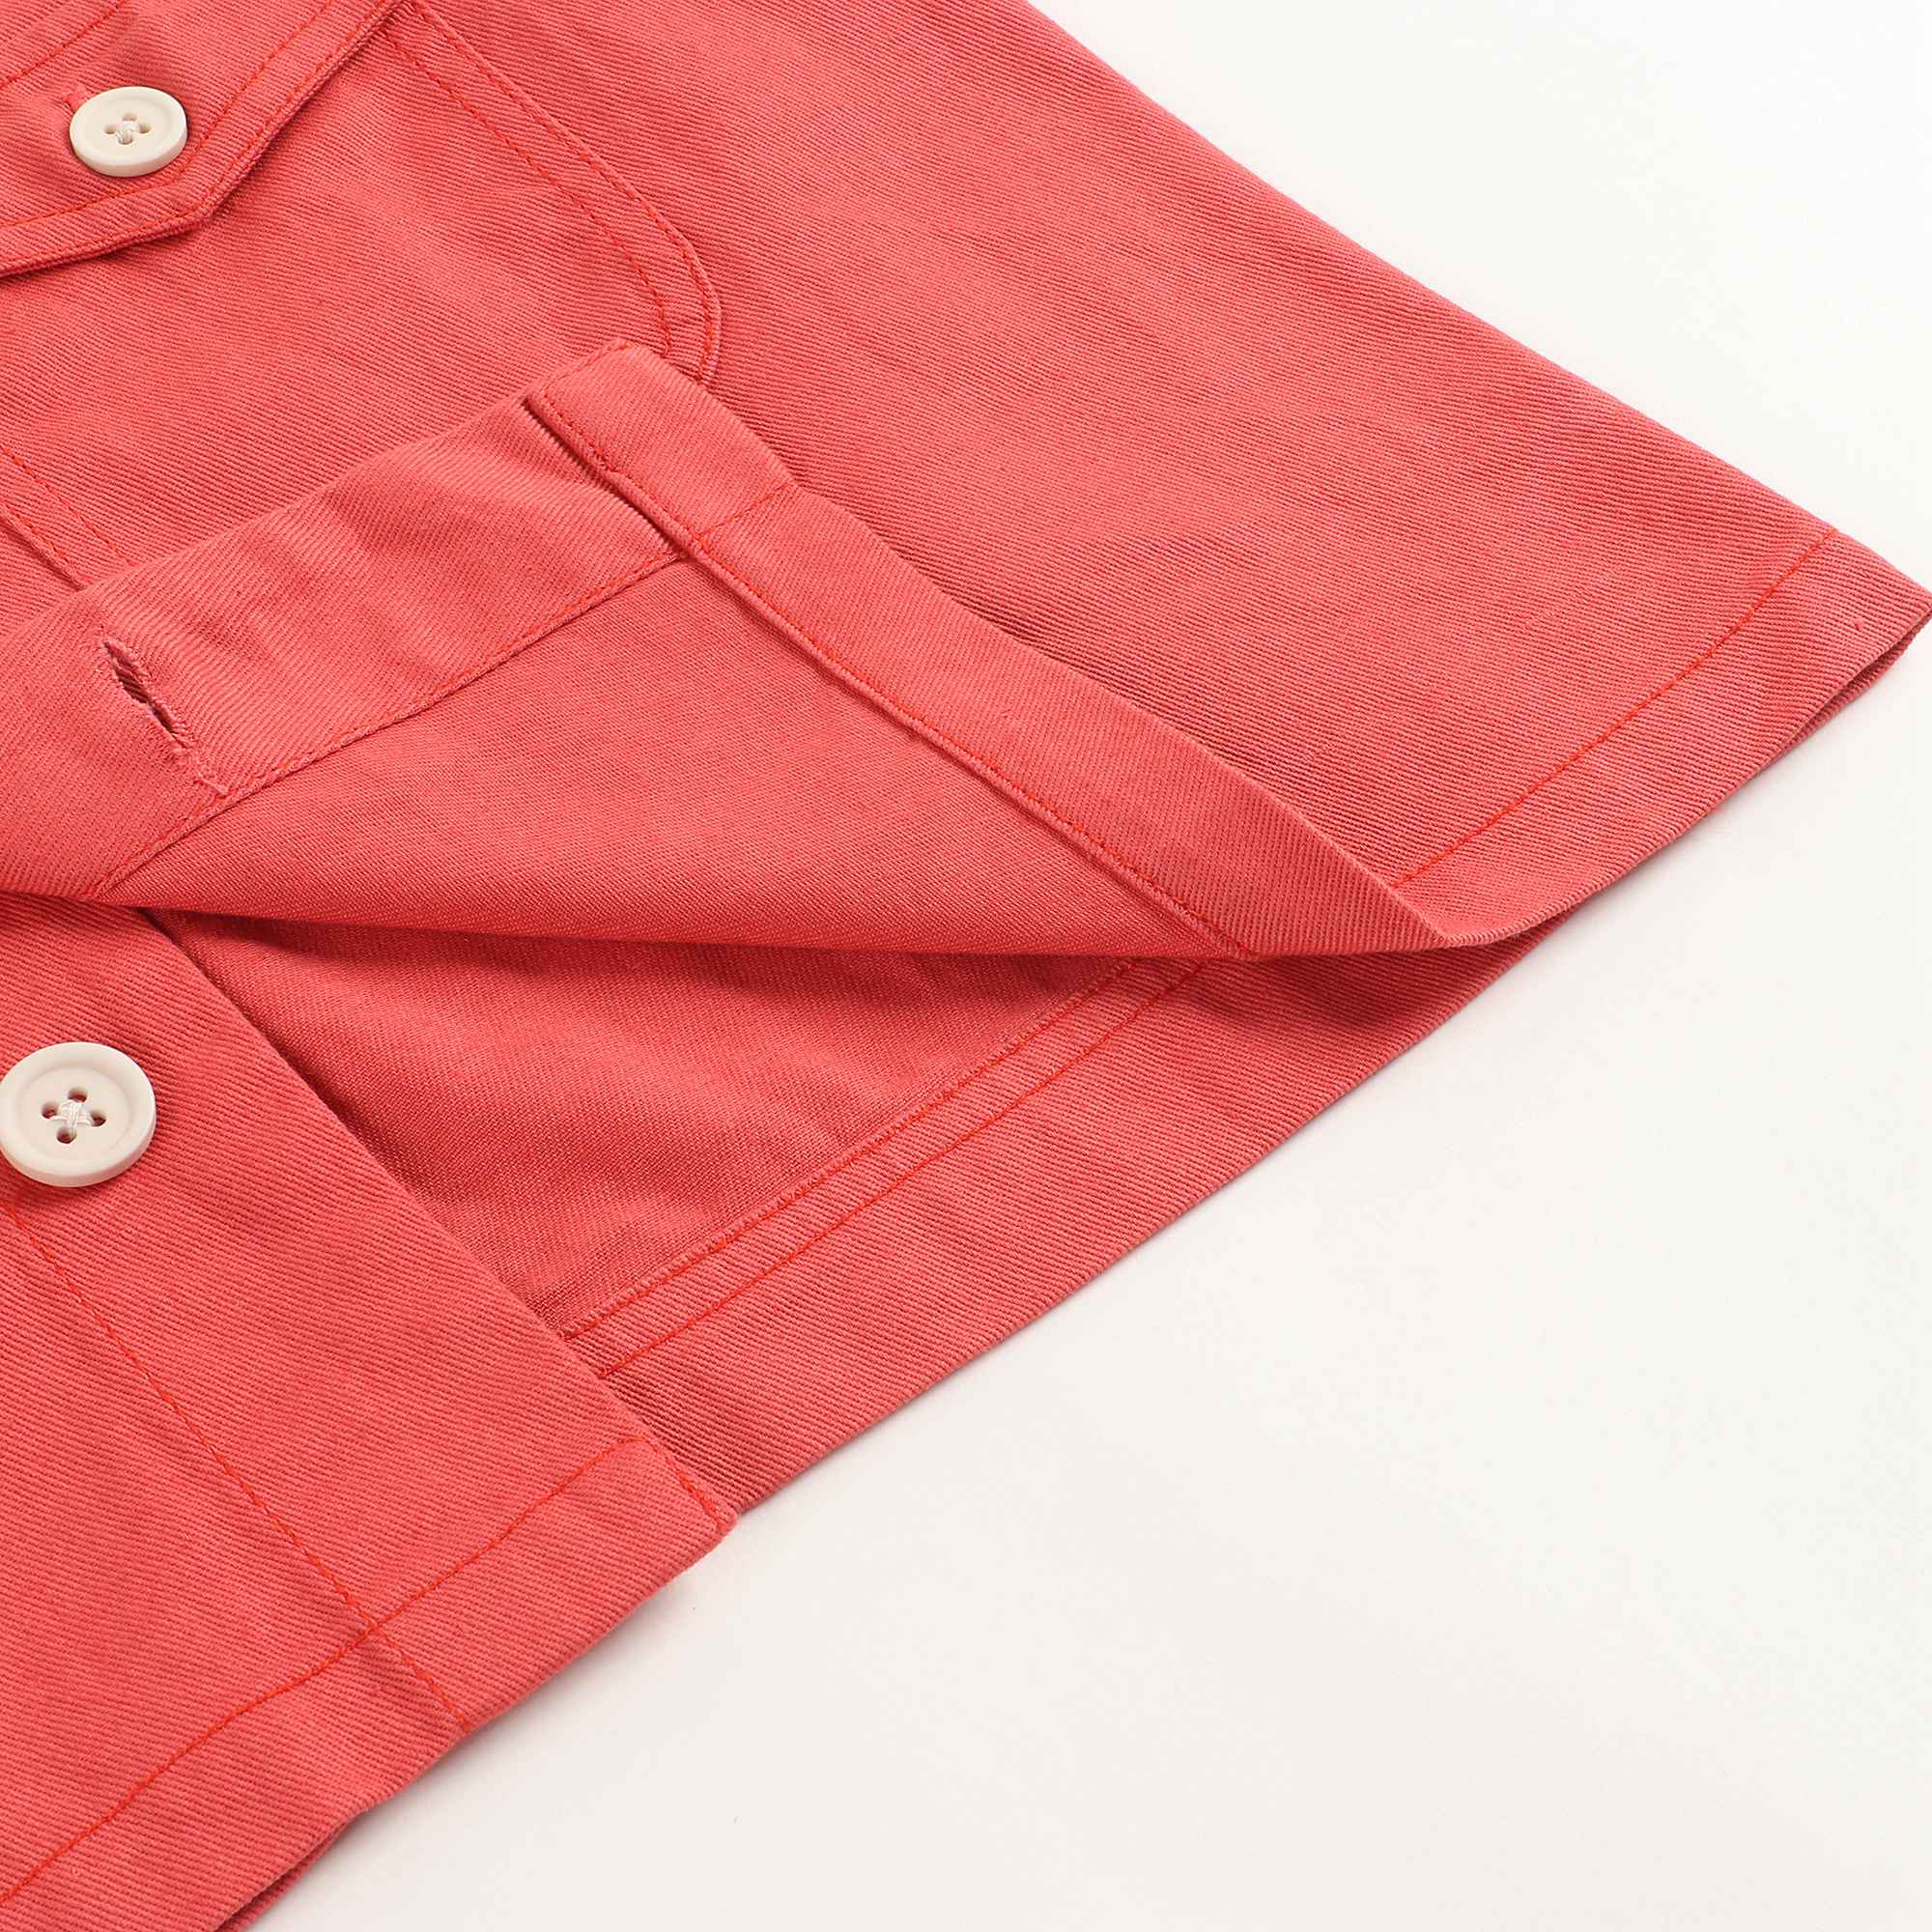 Boys Red Cotton Jacket